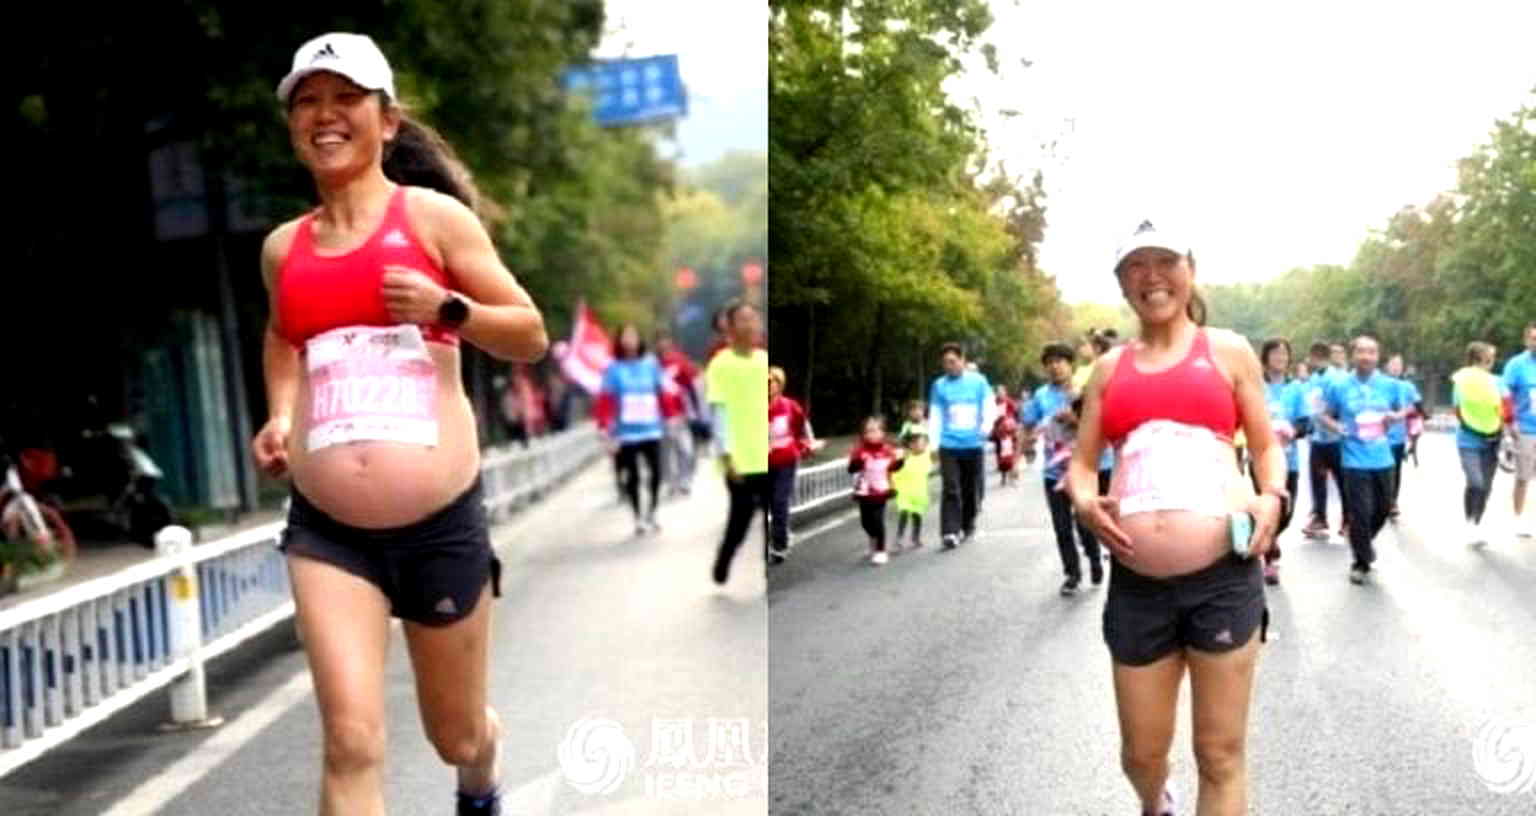 Chinese Supermom Finishes 1.2 Mile Race Despite Being 5 Months Pregnant